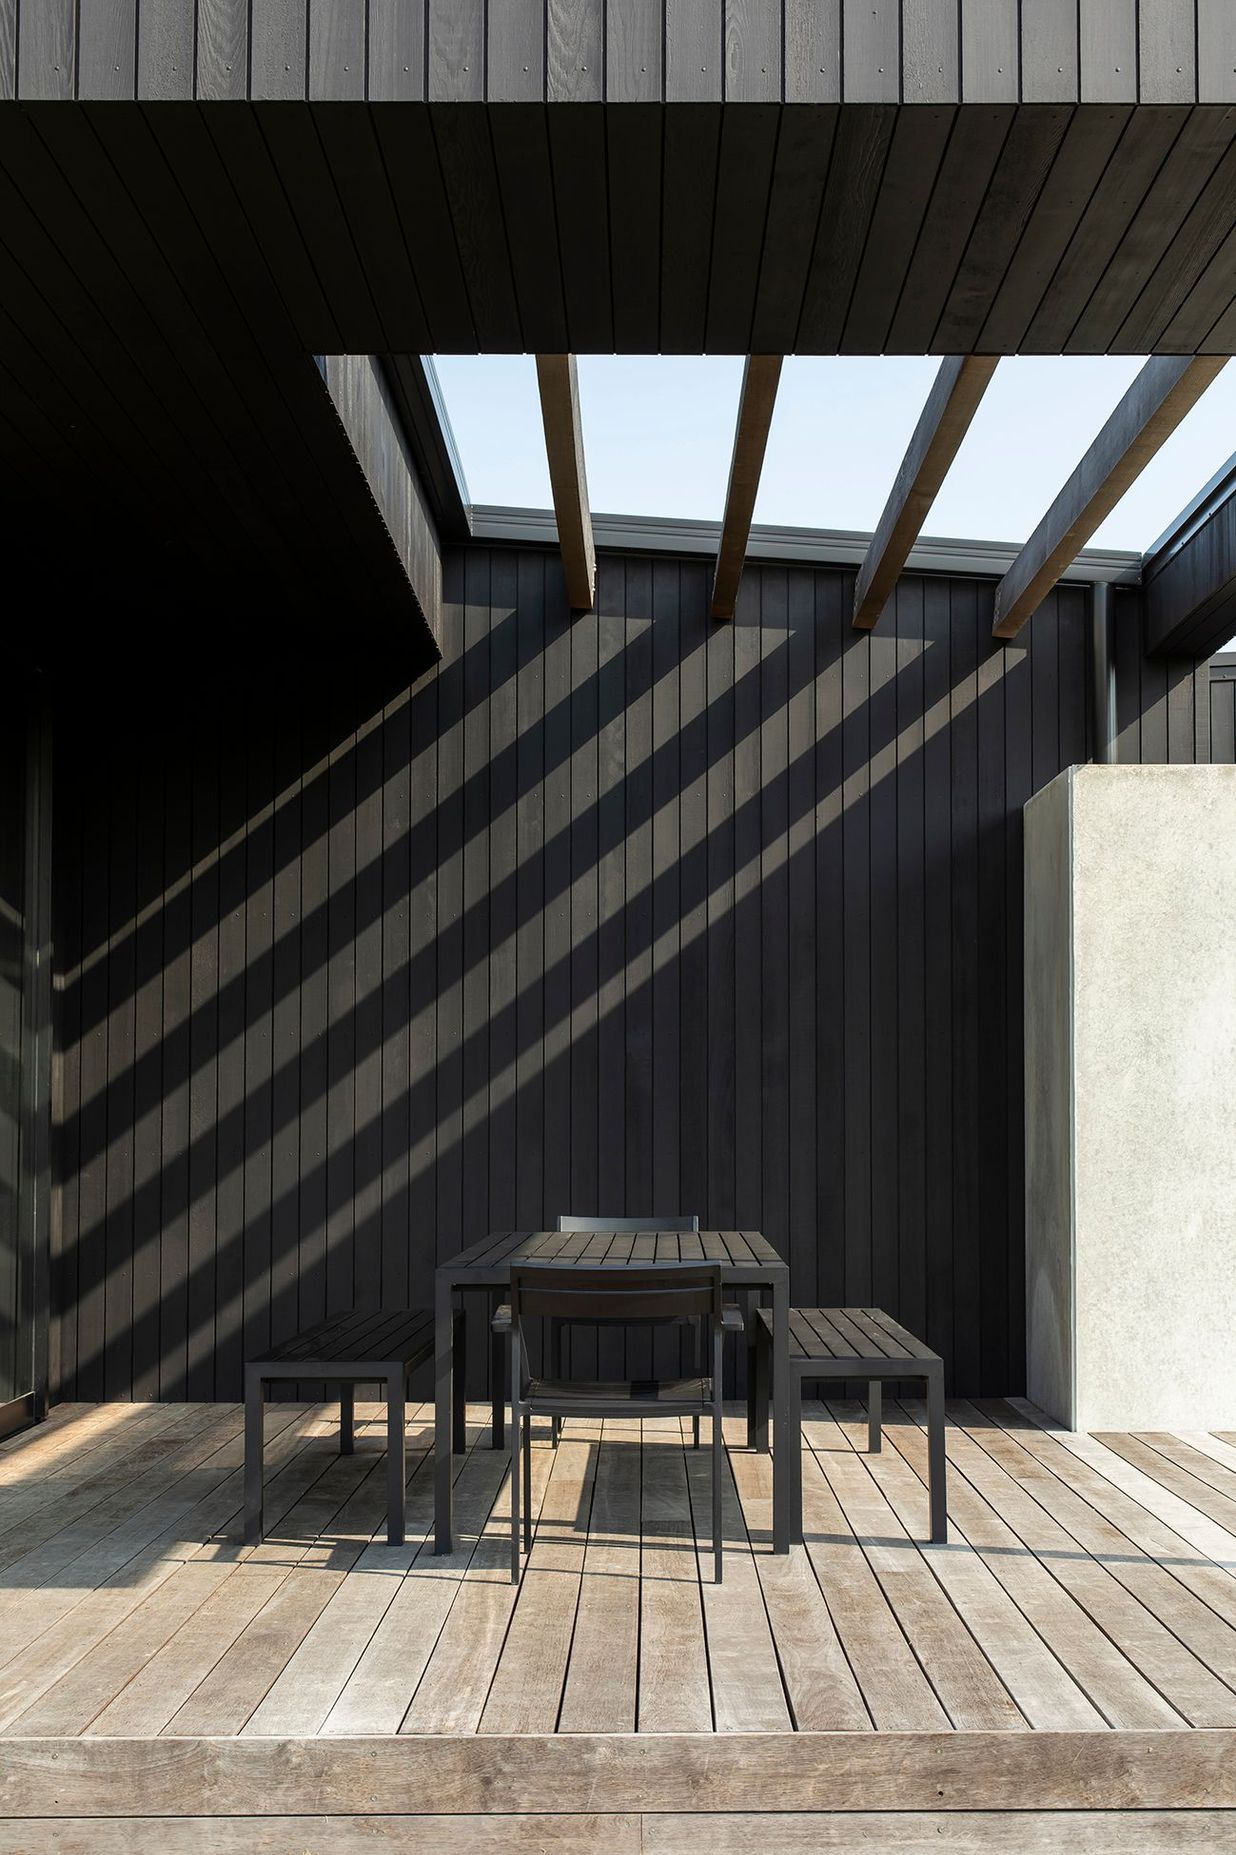 At Vineyard House, shadows from the overhead louvres stripe the timber wall of the outdoor room.